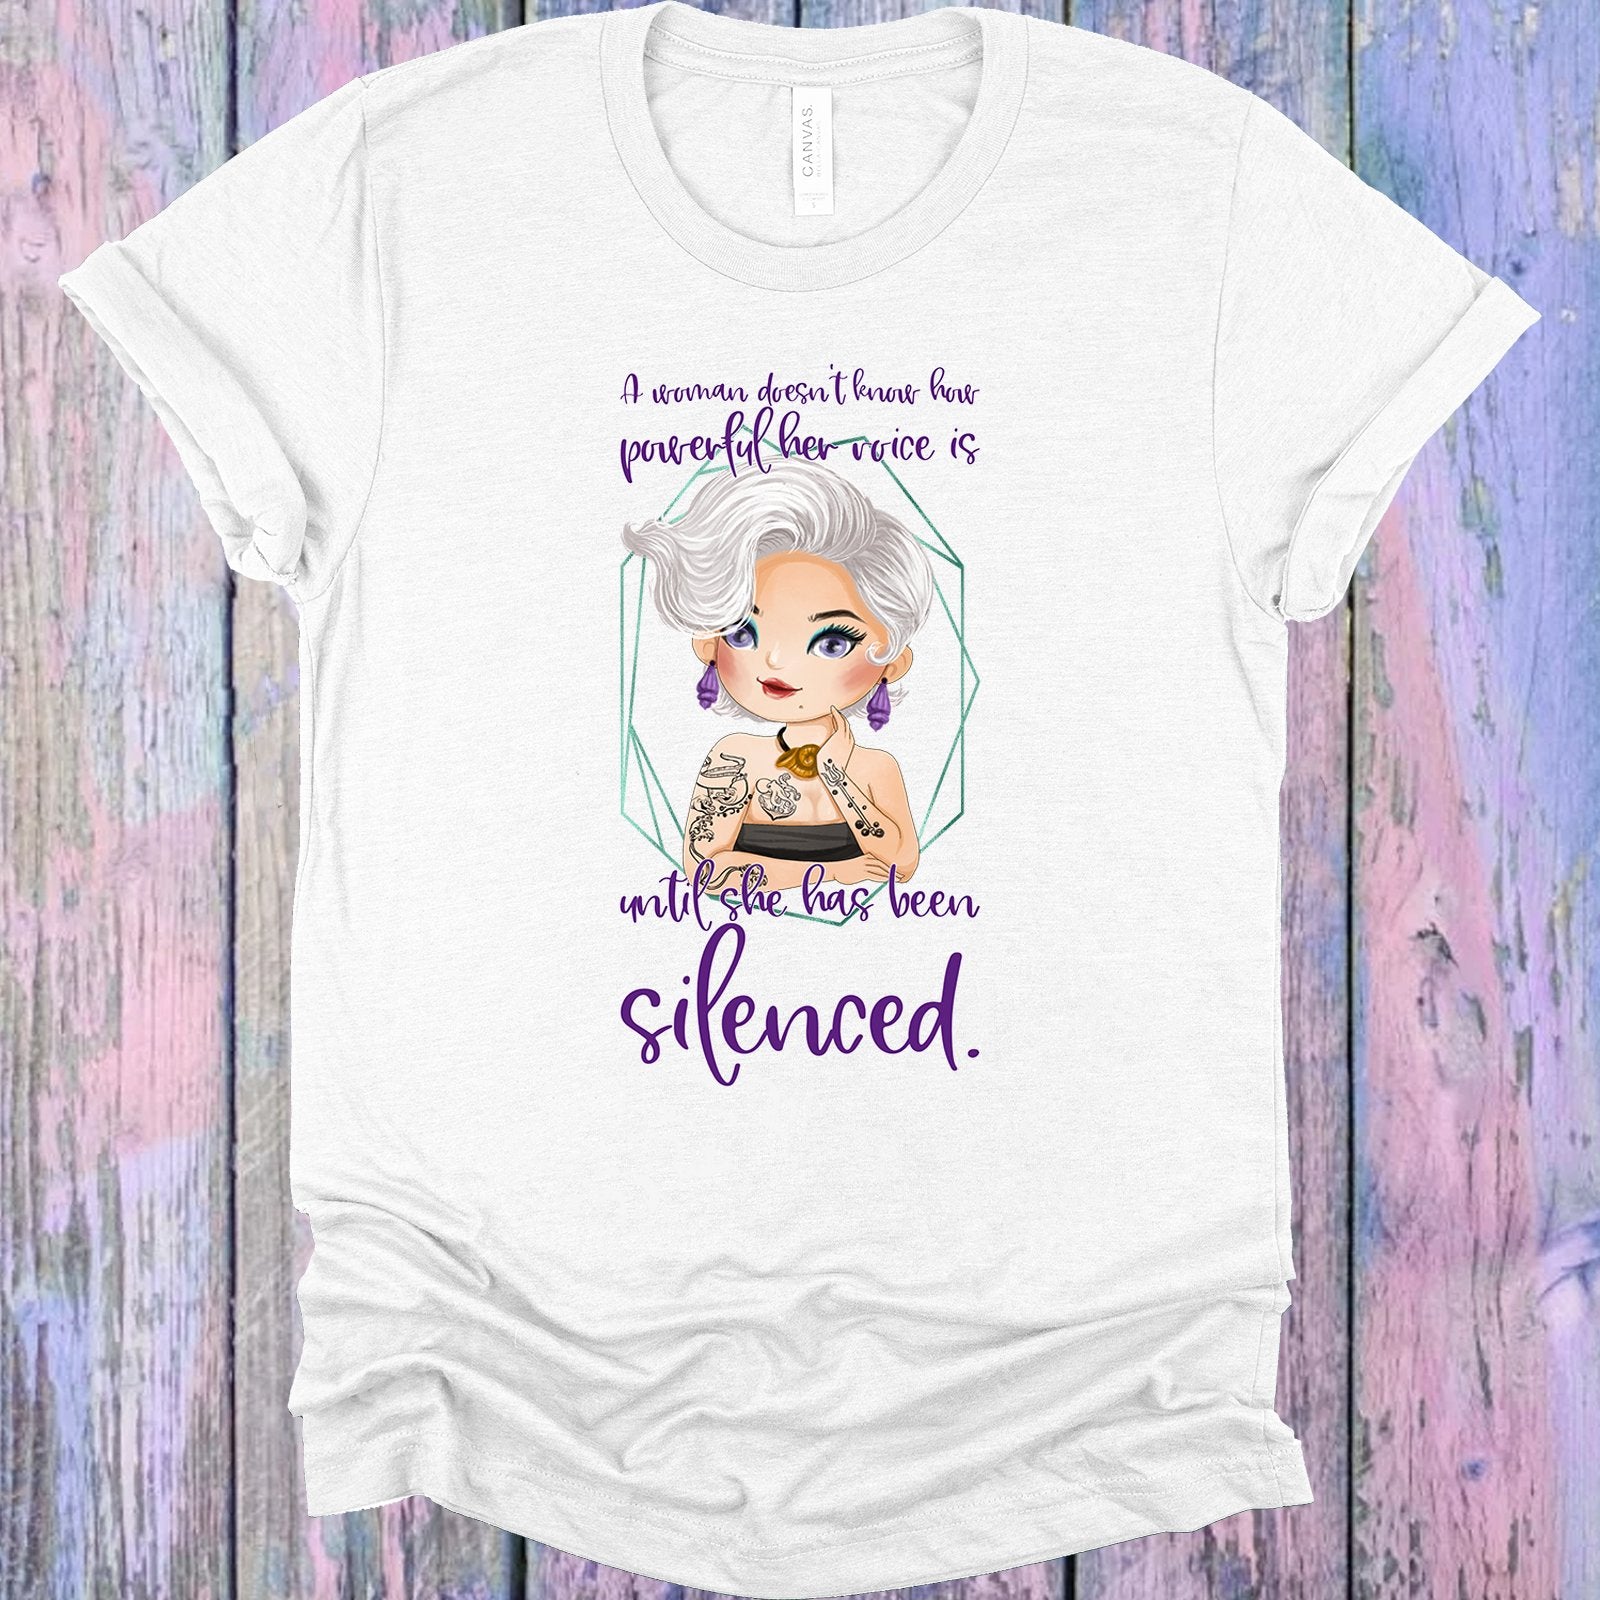 A Woman Doesnt Know How Powerful Her Voice Is Until She Has Been Silenced Graphic Tee Graphic Tee